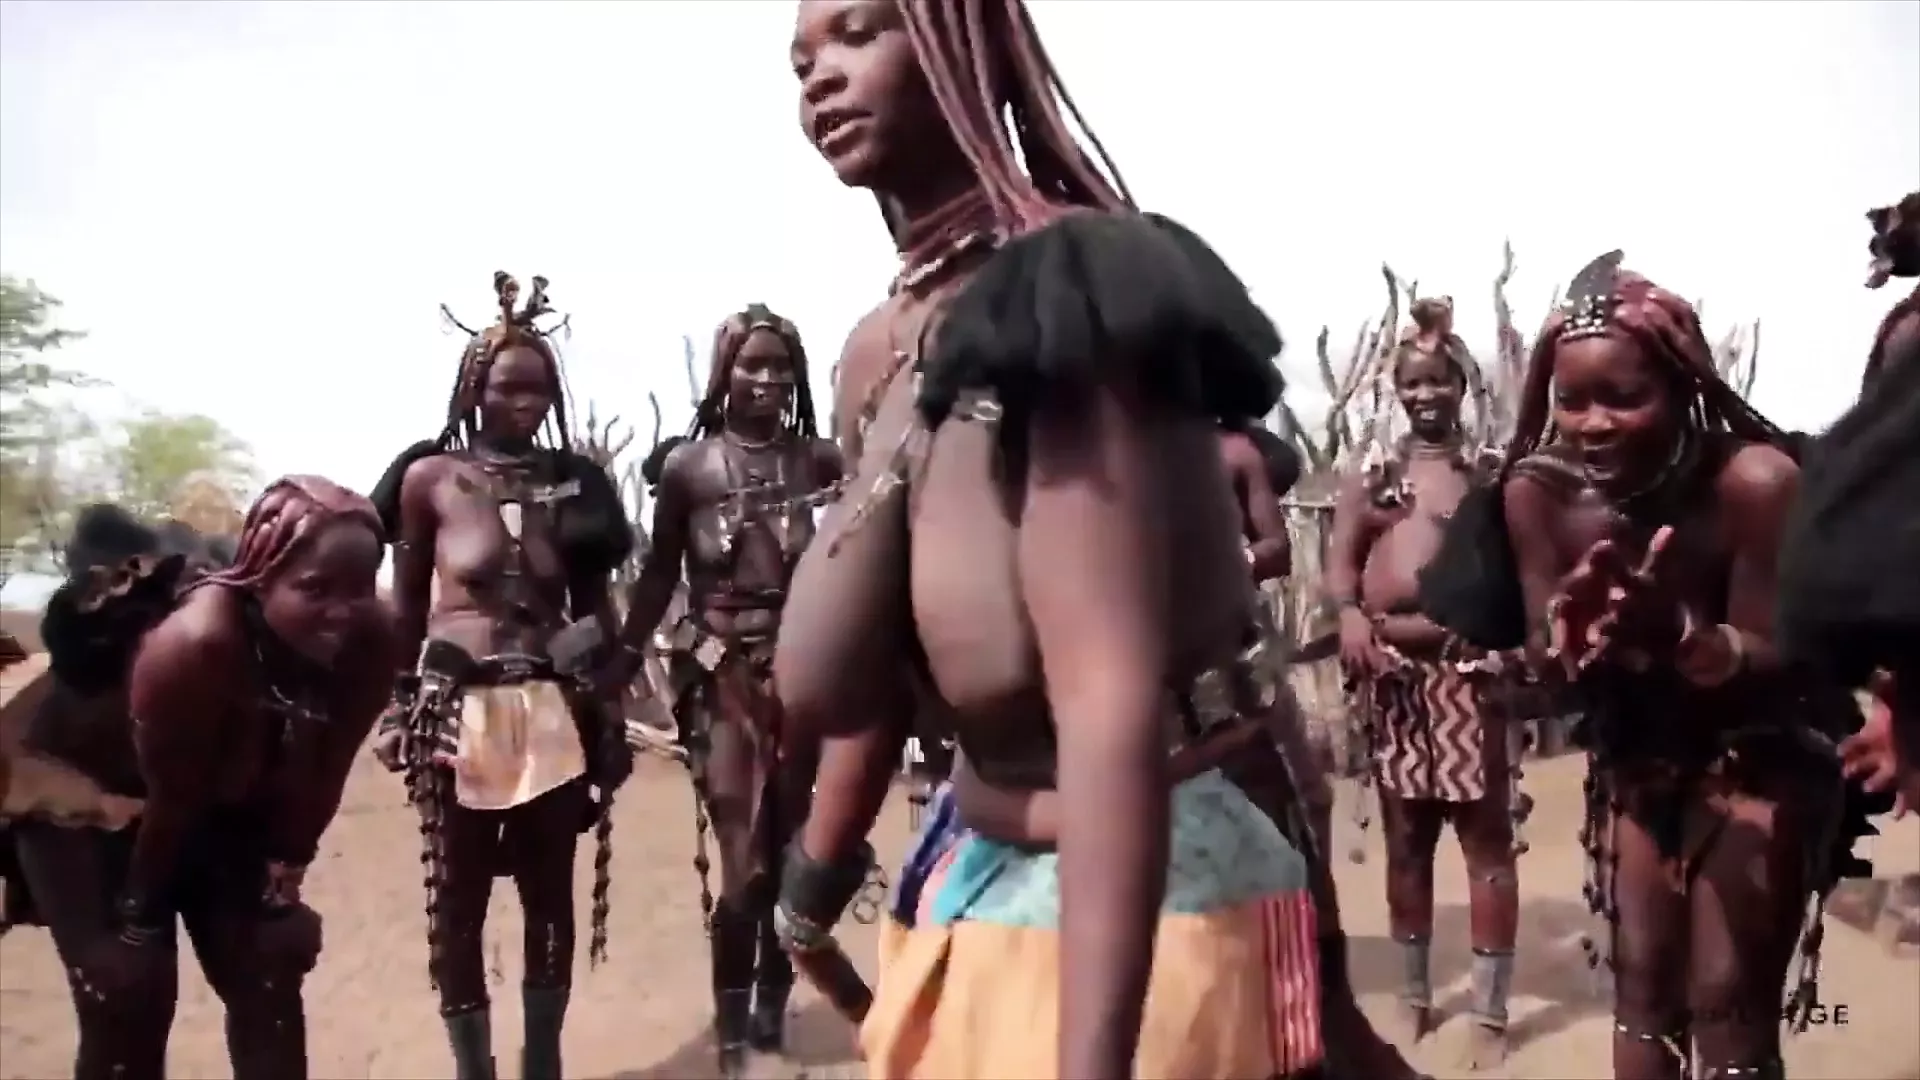 African Himba women dance and swing their saggy tits around picture